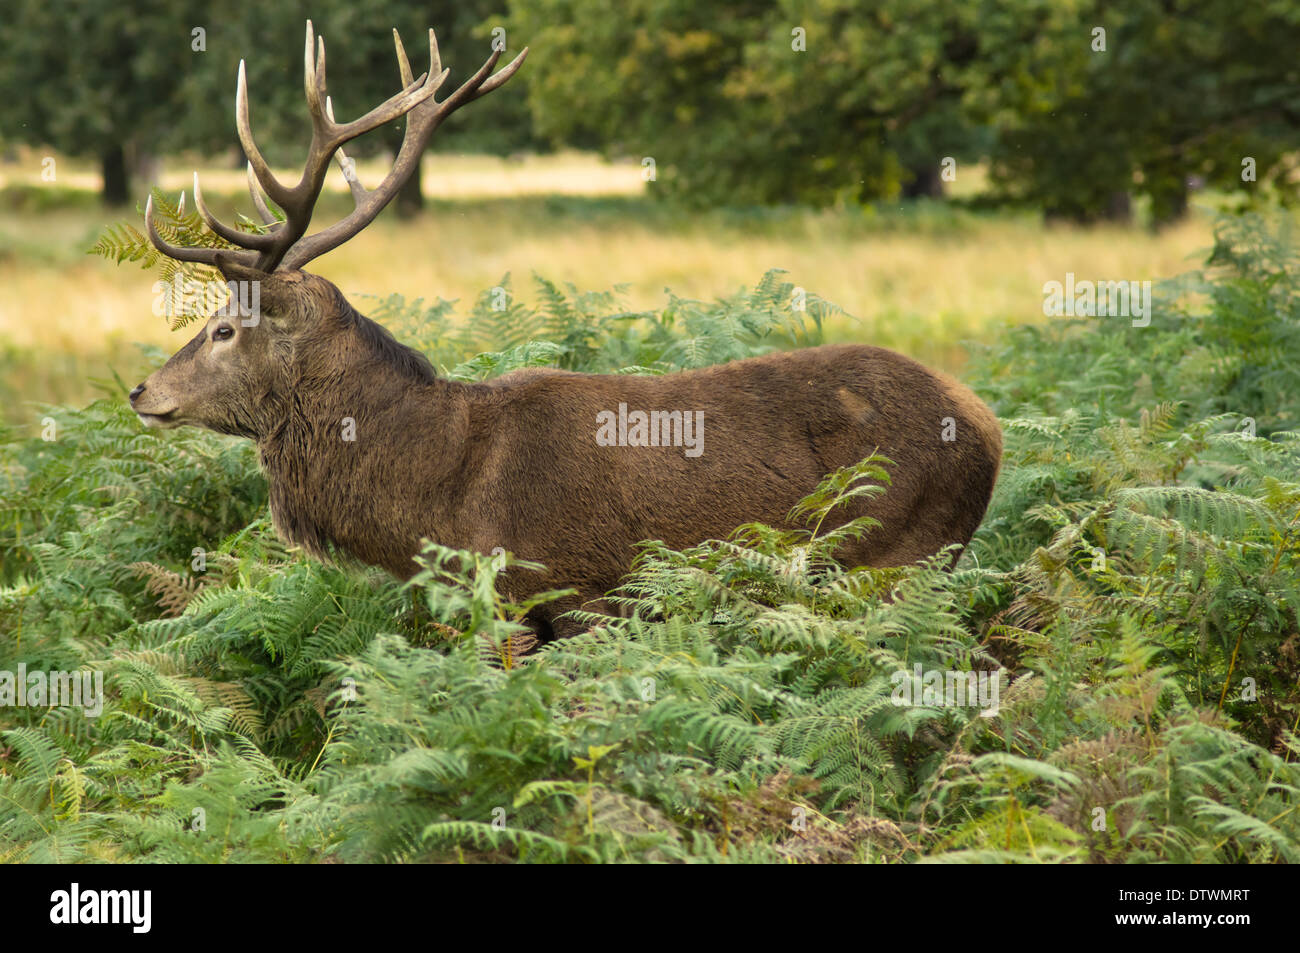 Red deer standing on meadow in forest Stock Photo